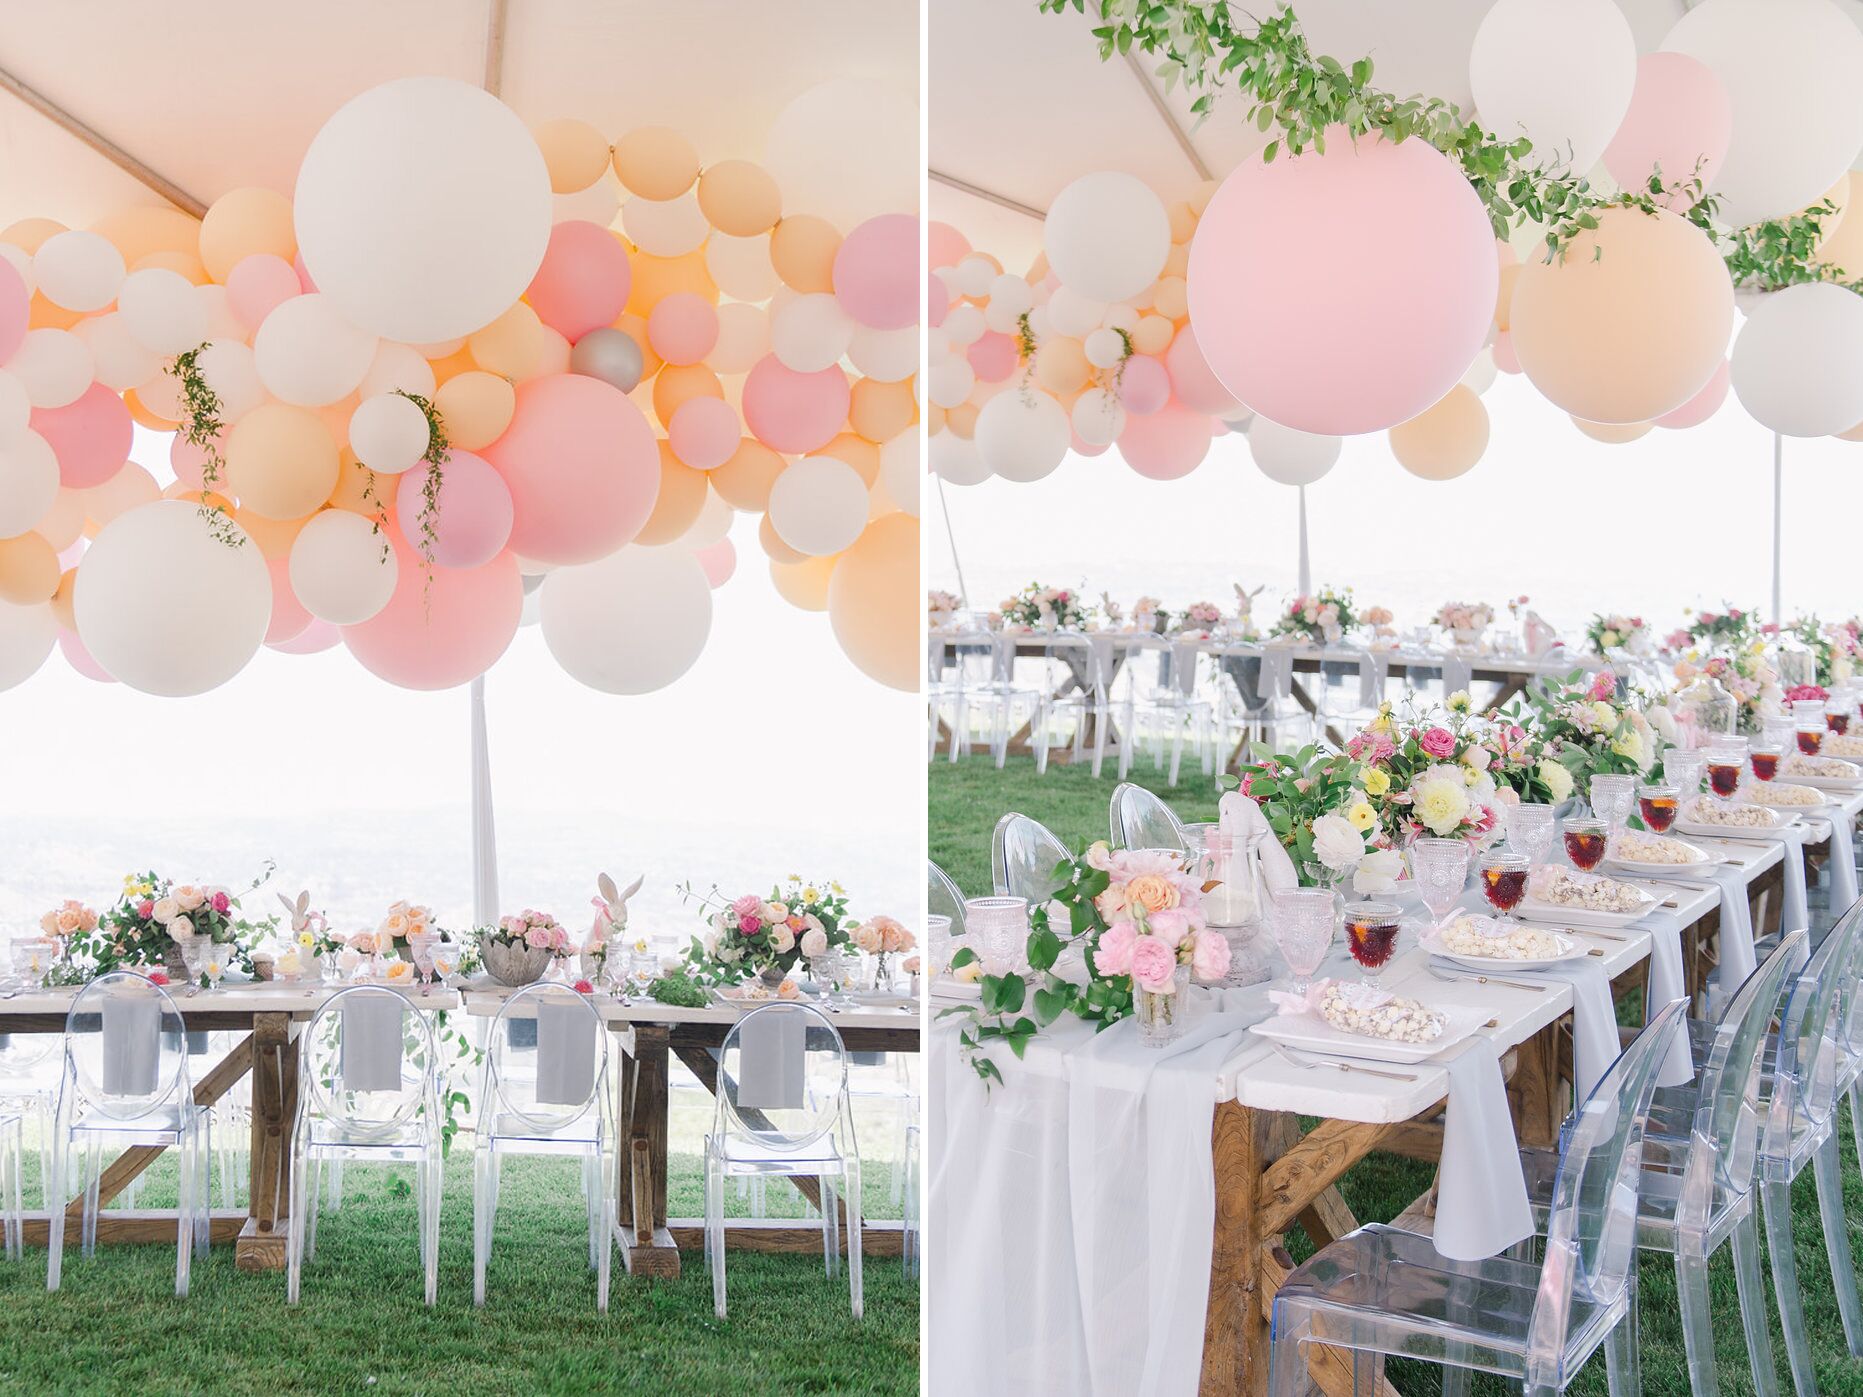 21 Spectacular DIY Wedding Balloon Decorations | Why Settle for Less?